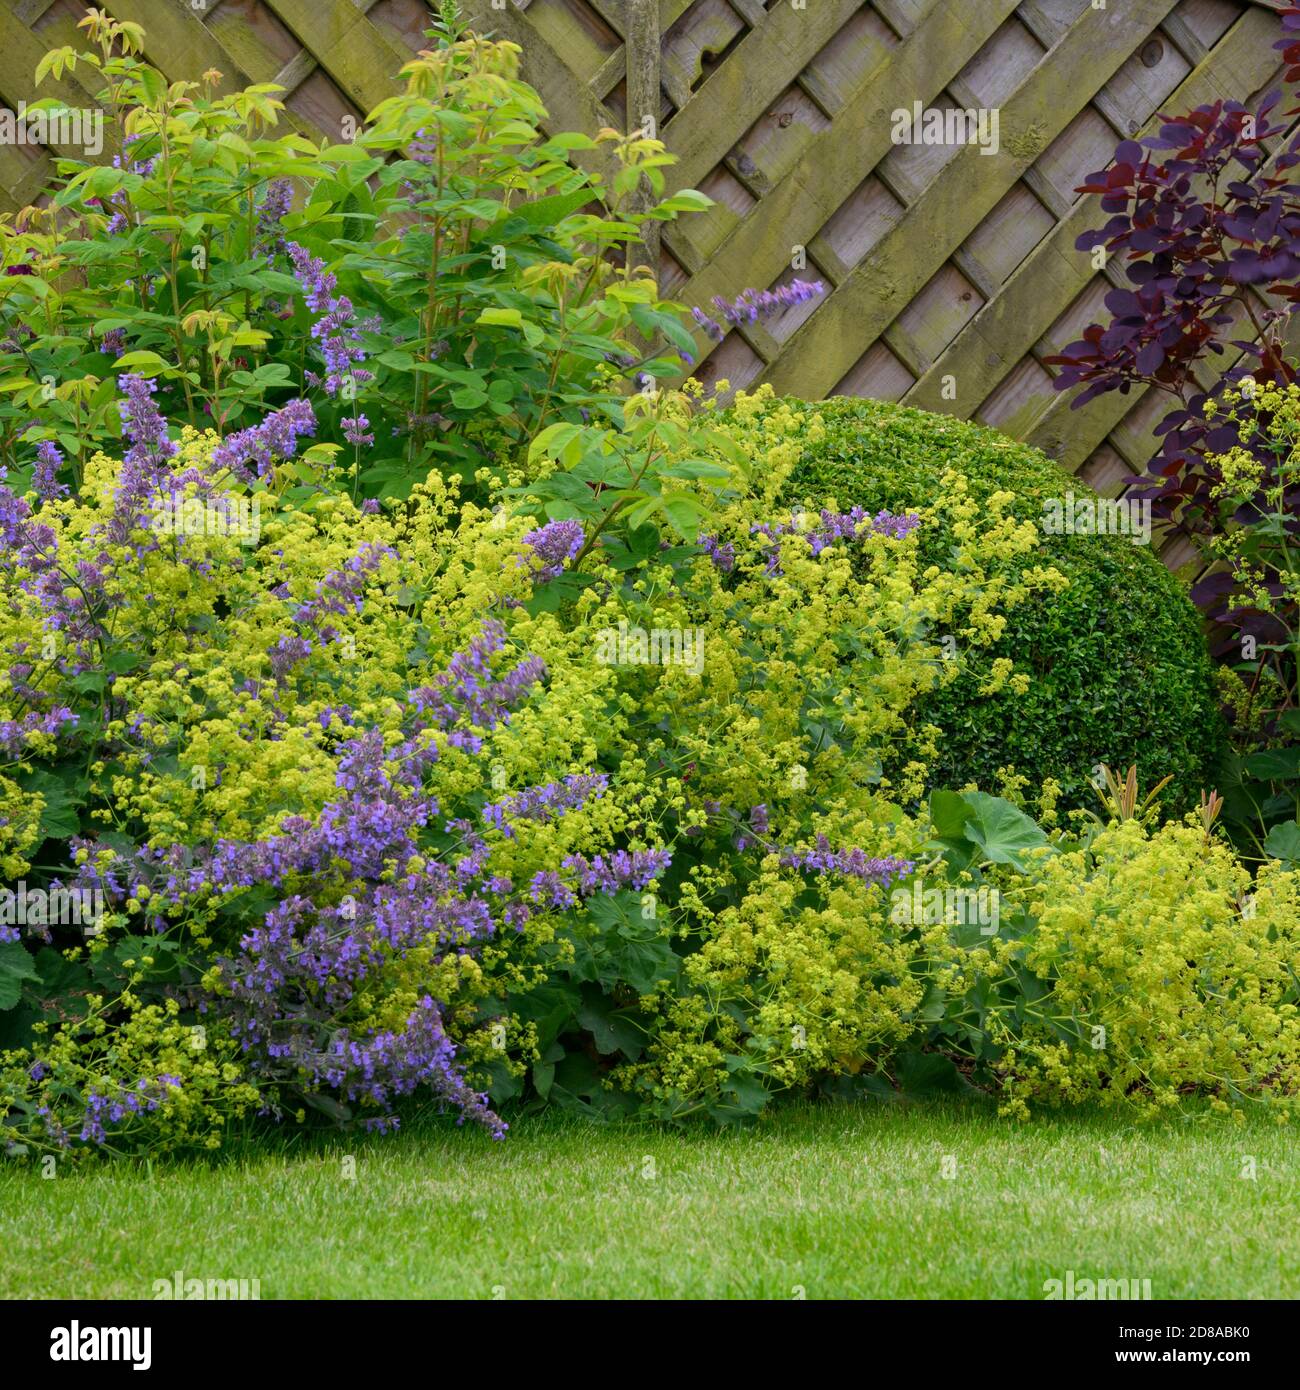 Landscaped private garden close-up (cottage design, summer flowers, mixed border plants, shrubs, colourful foliage, fencing) - Yorkshire, England, UK. Stock Photo